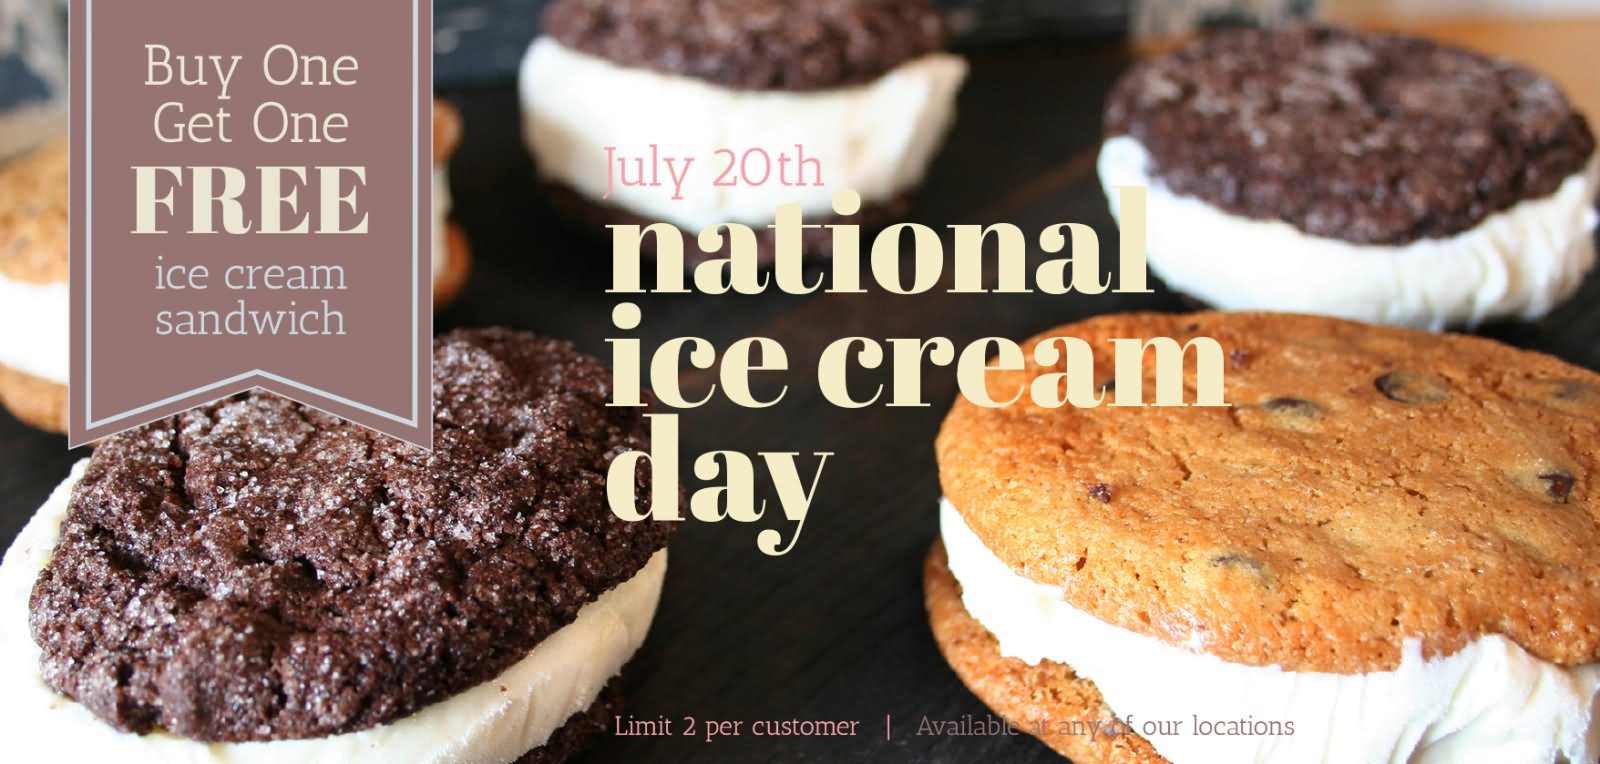 July 20th National Ice Cream Day